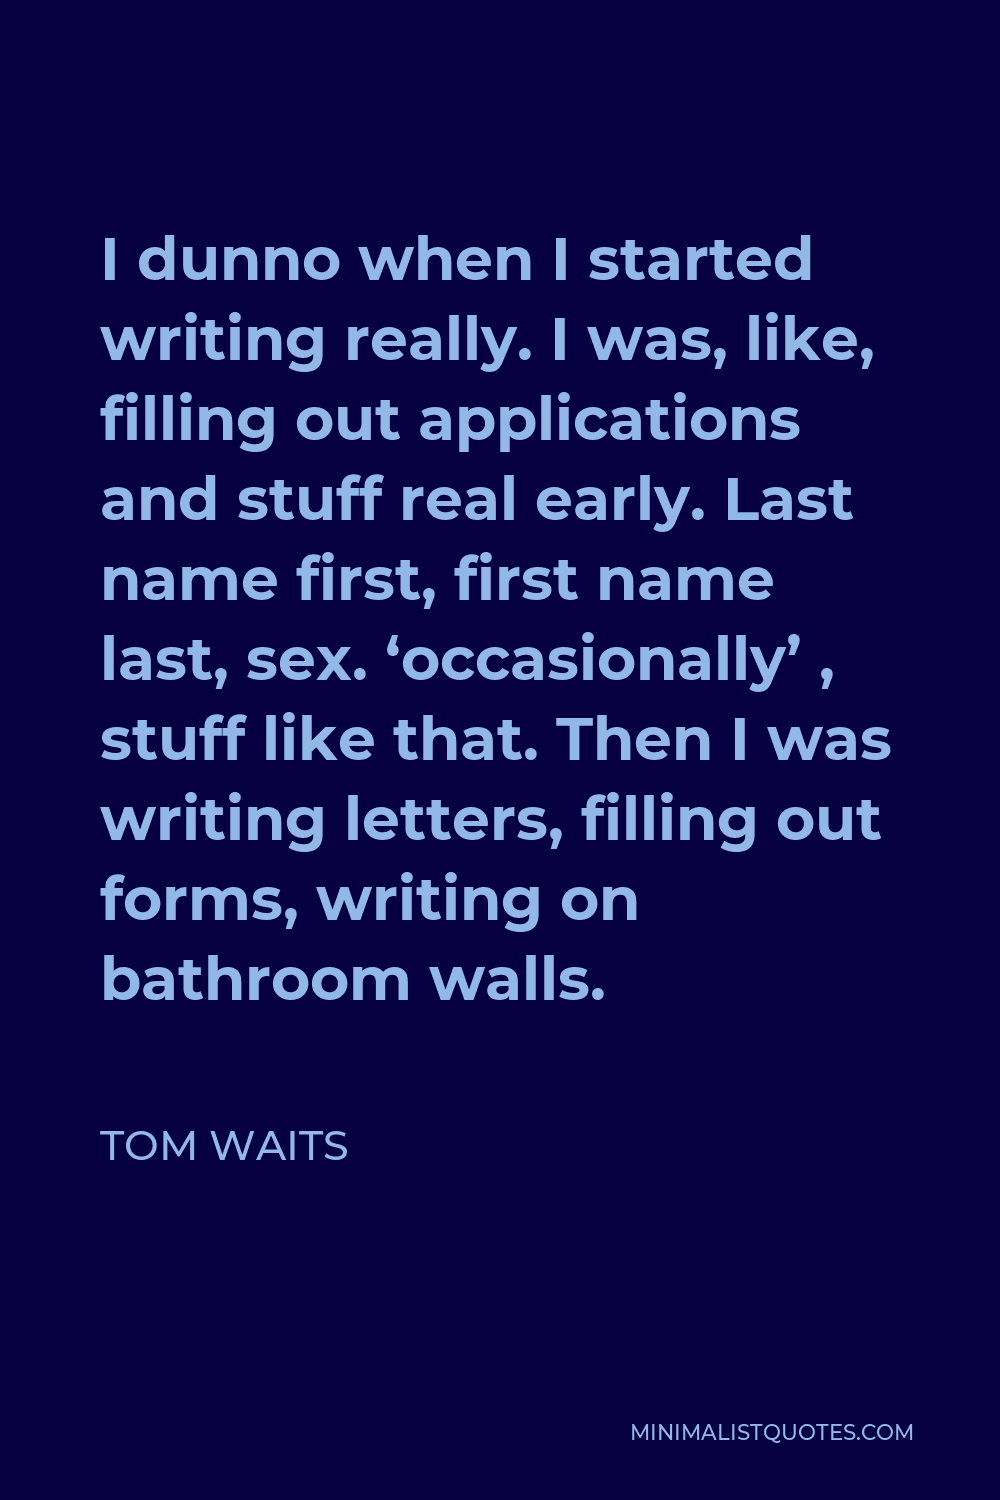 Tom Waits Quote - I dunno when I started writing really. I was, like, filling out applications and stuff real early. Last name first, first name last, sex. ‘occasionally’ , stuff like that. Then I was writing letters, filling out forms, writing on bathroom walls.